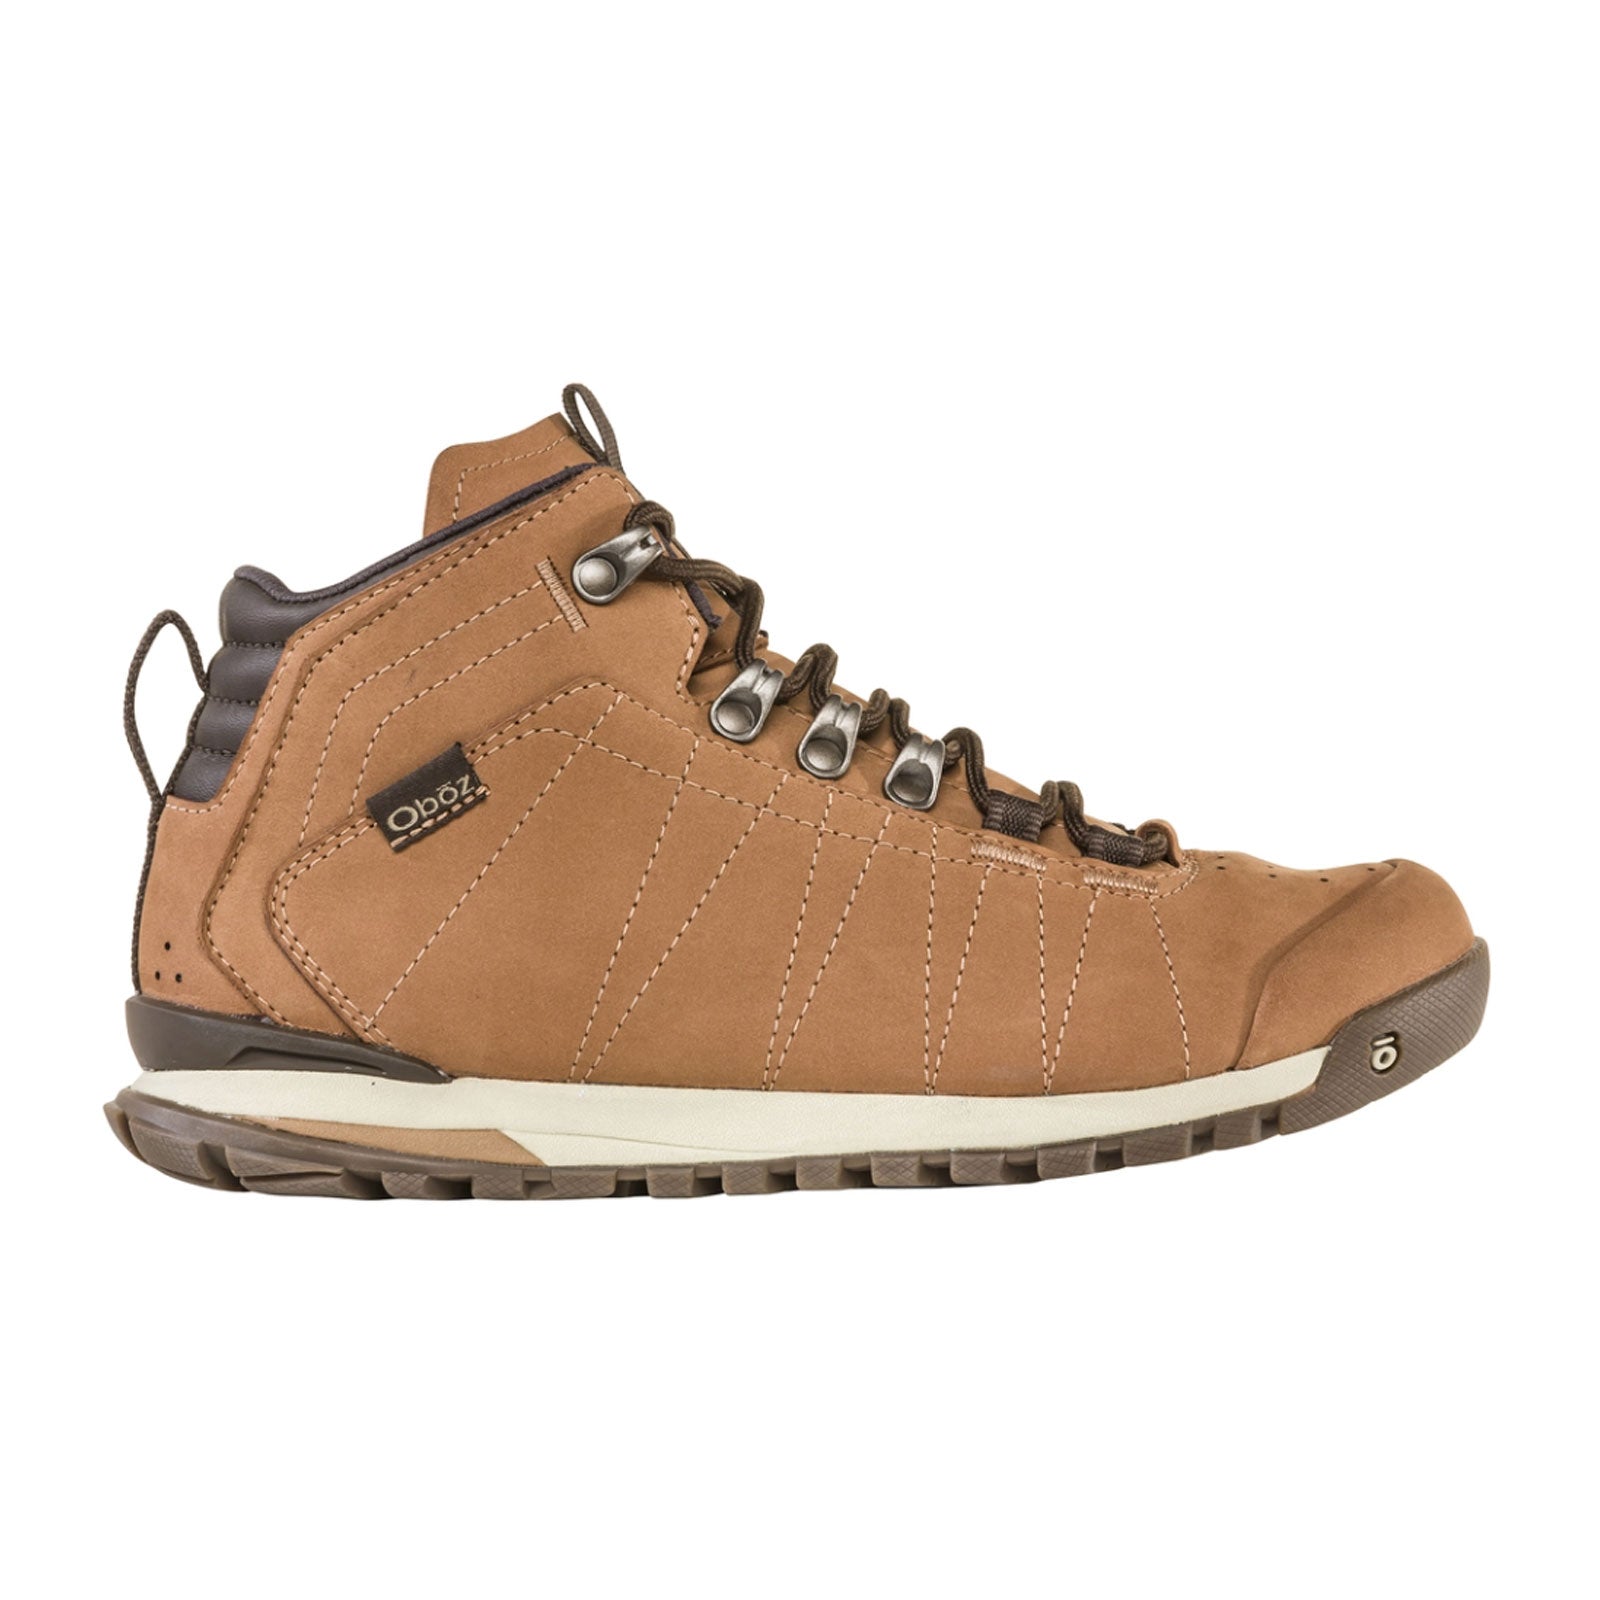 Oboz Bozeman Mid Leather Hiking Boot (Women) - Chipmunk Boots - Hiking - Mid - The Heel Shoe Fitters